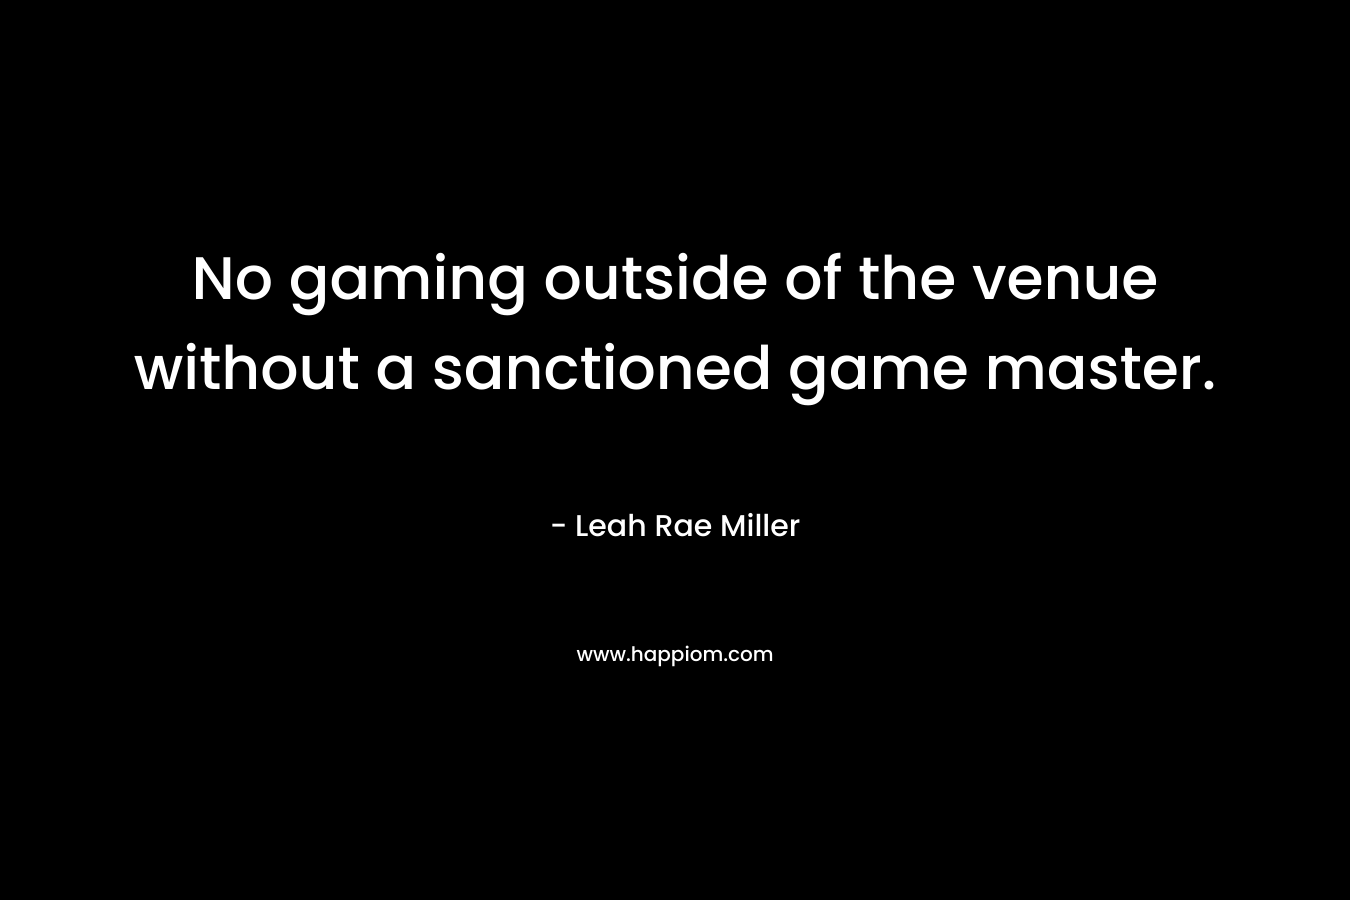 No gaming outside of the venue without a sanctioned game master. – Leah Rae Miller